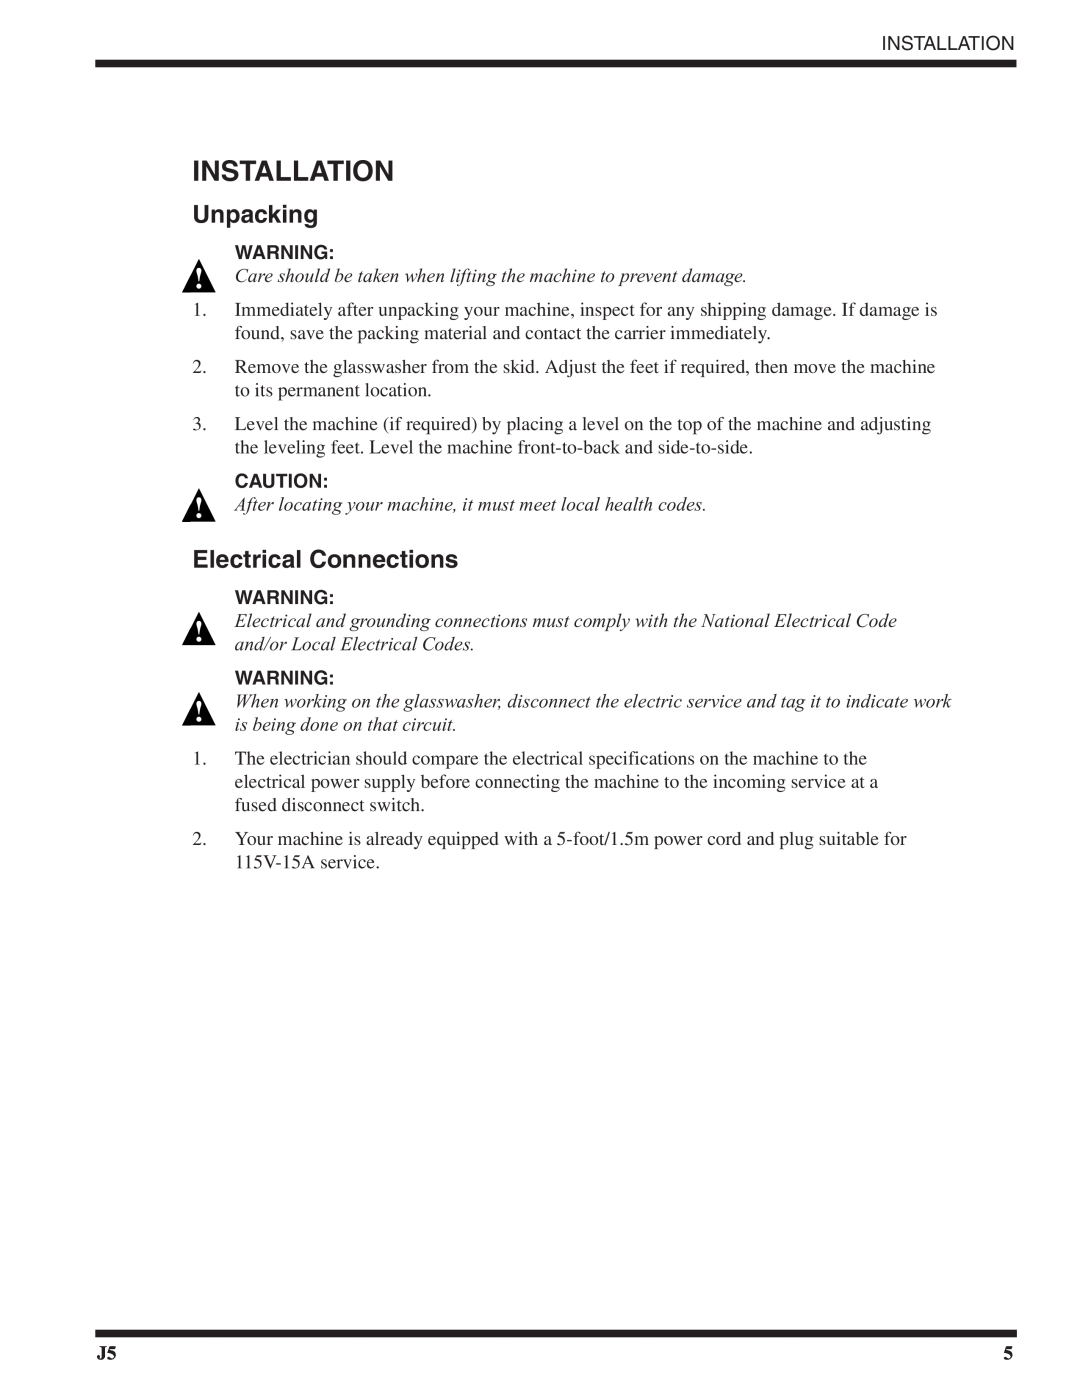 Moyer Diebel MD18-2, MD18-1 technical manual Installation, Unpacking, Electrical Connections 